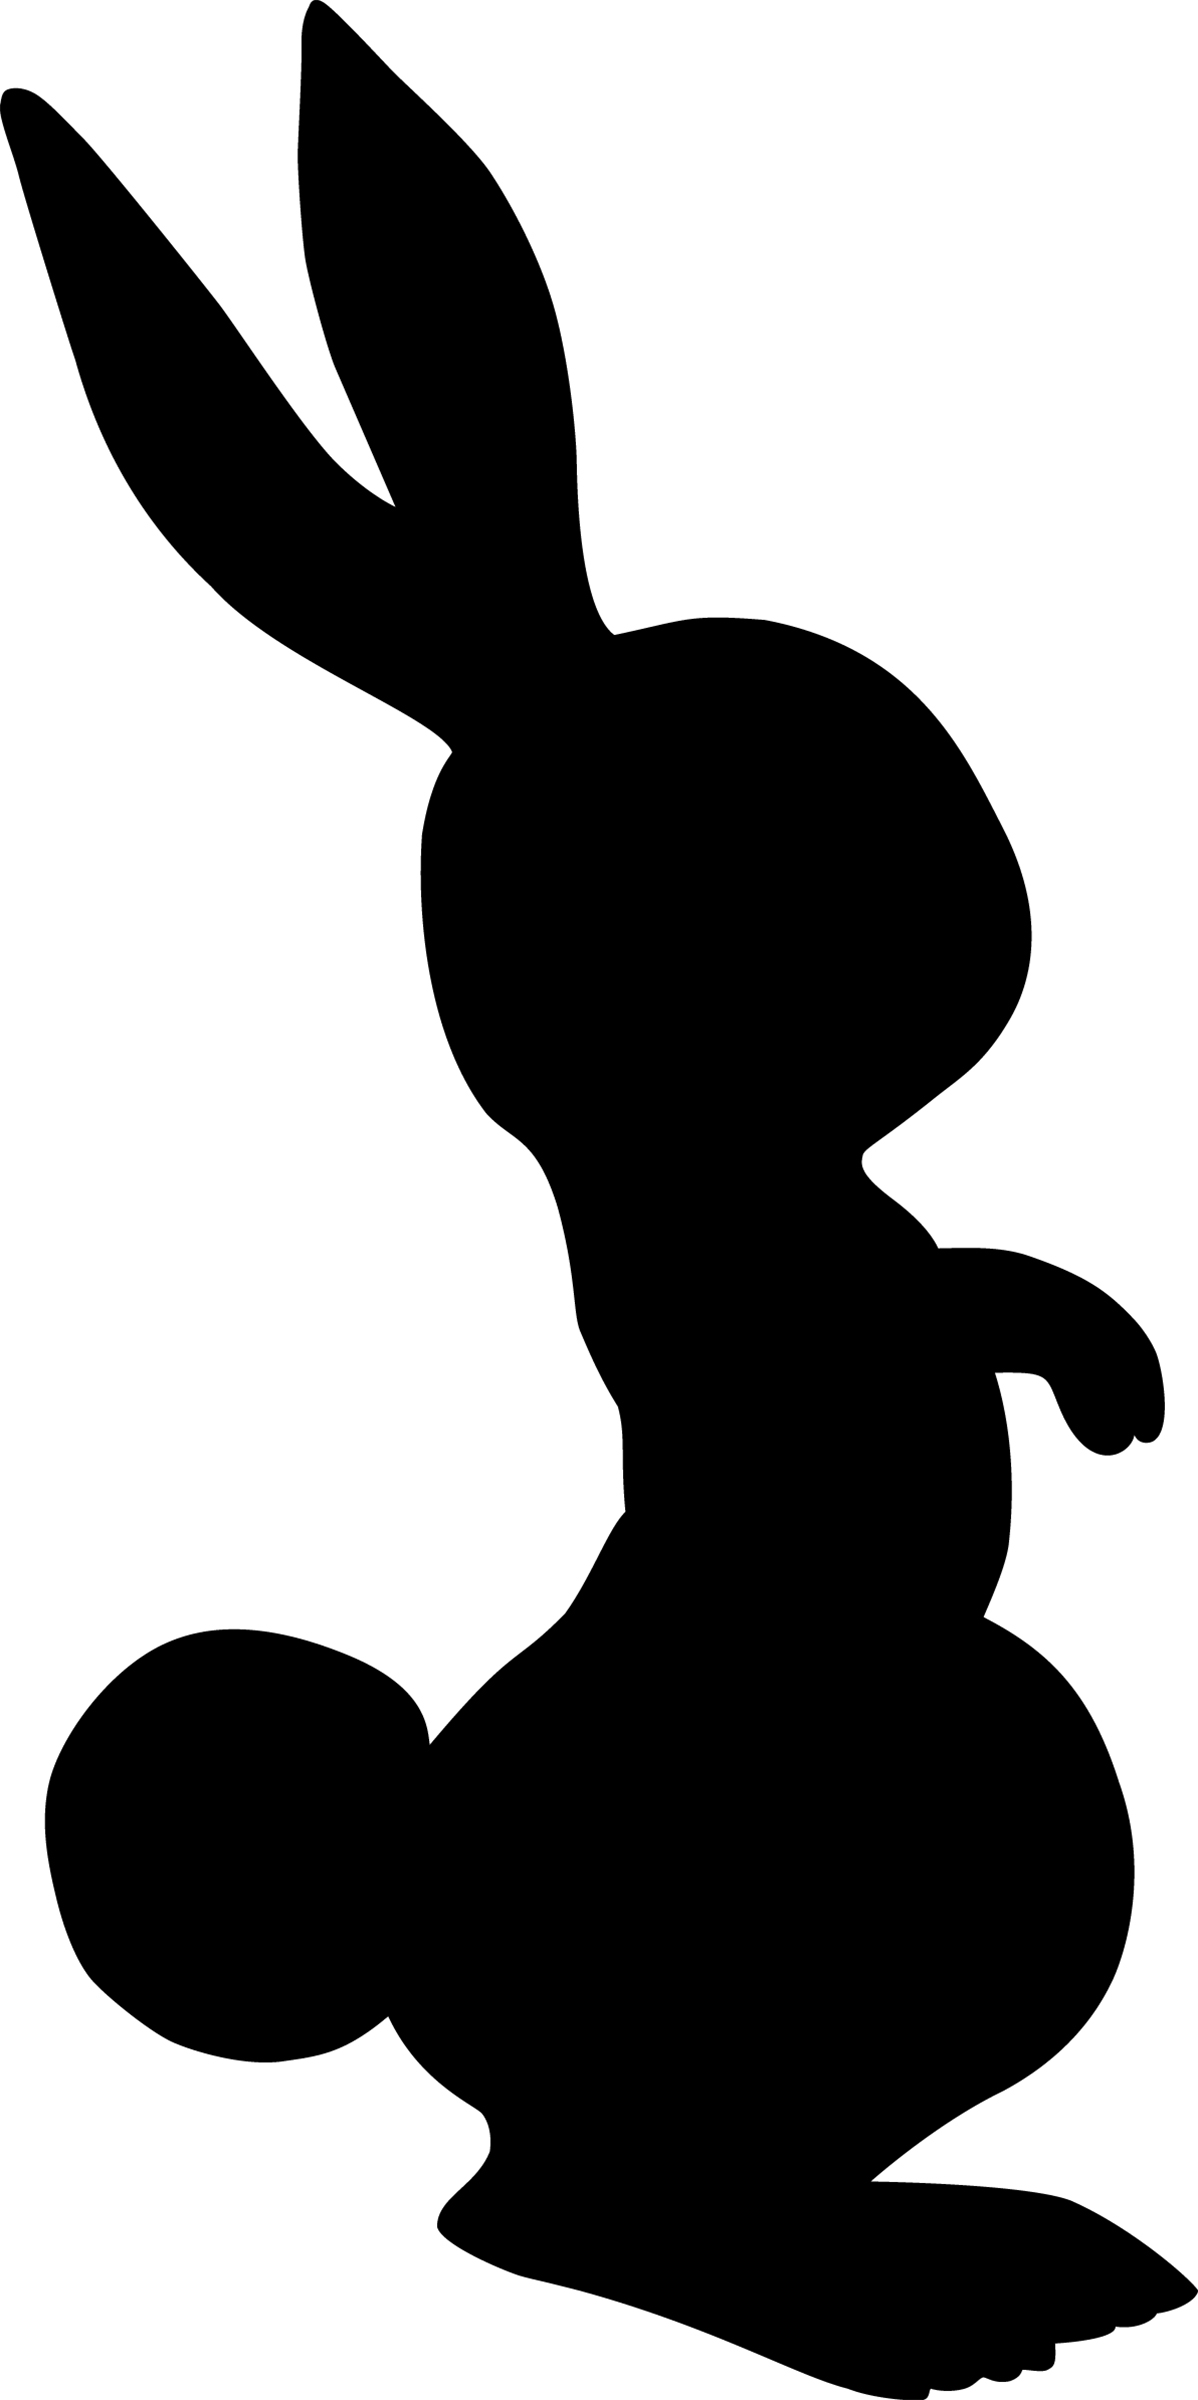 20 Bunny Rabbit Silhouettes and Clip Art - The Graphics Fairy